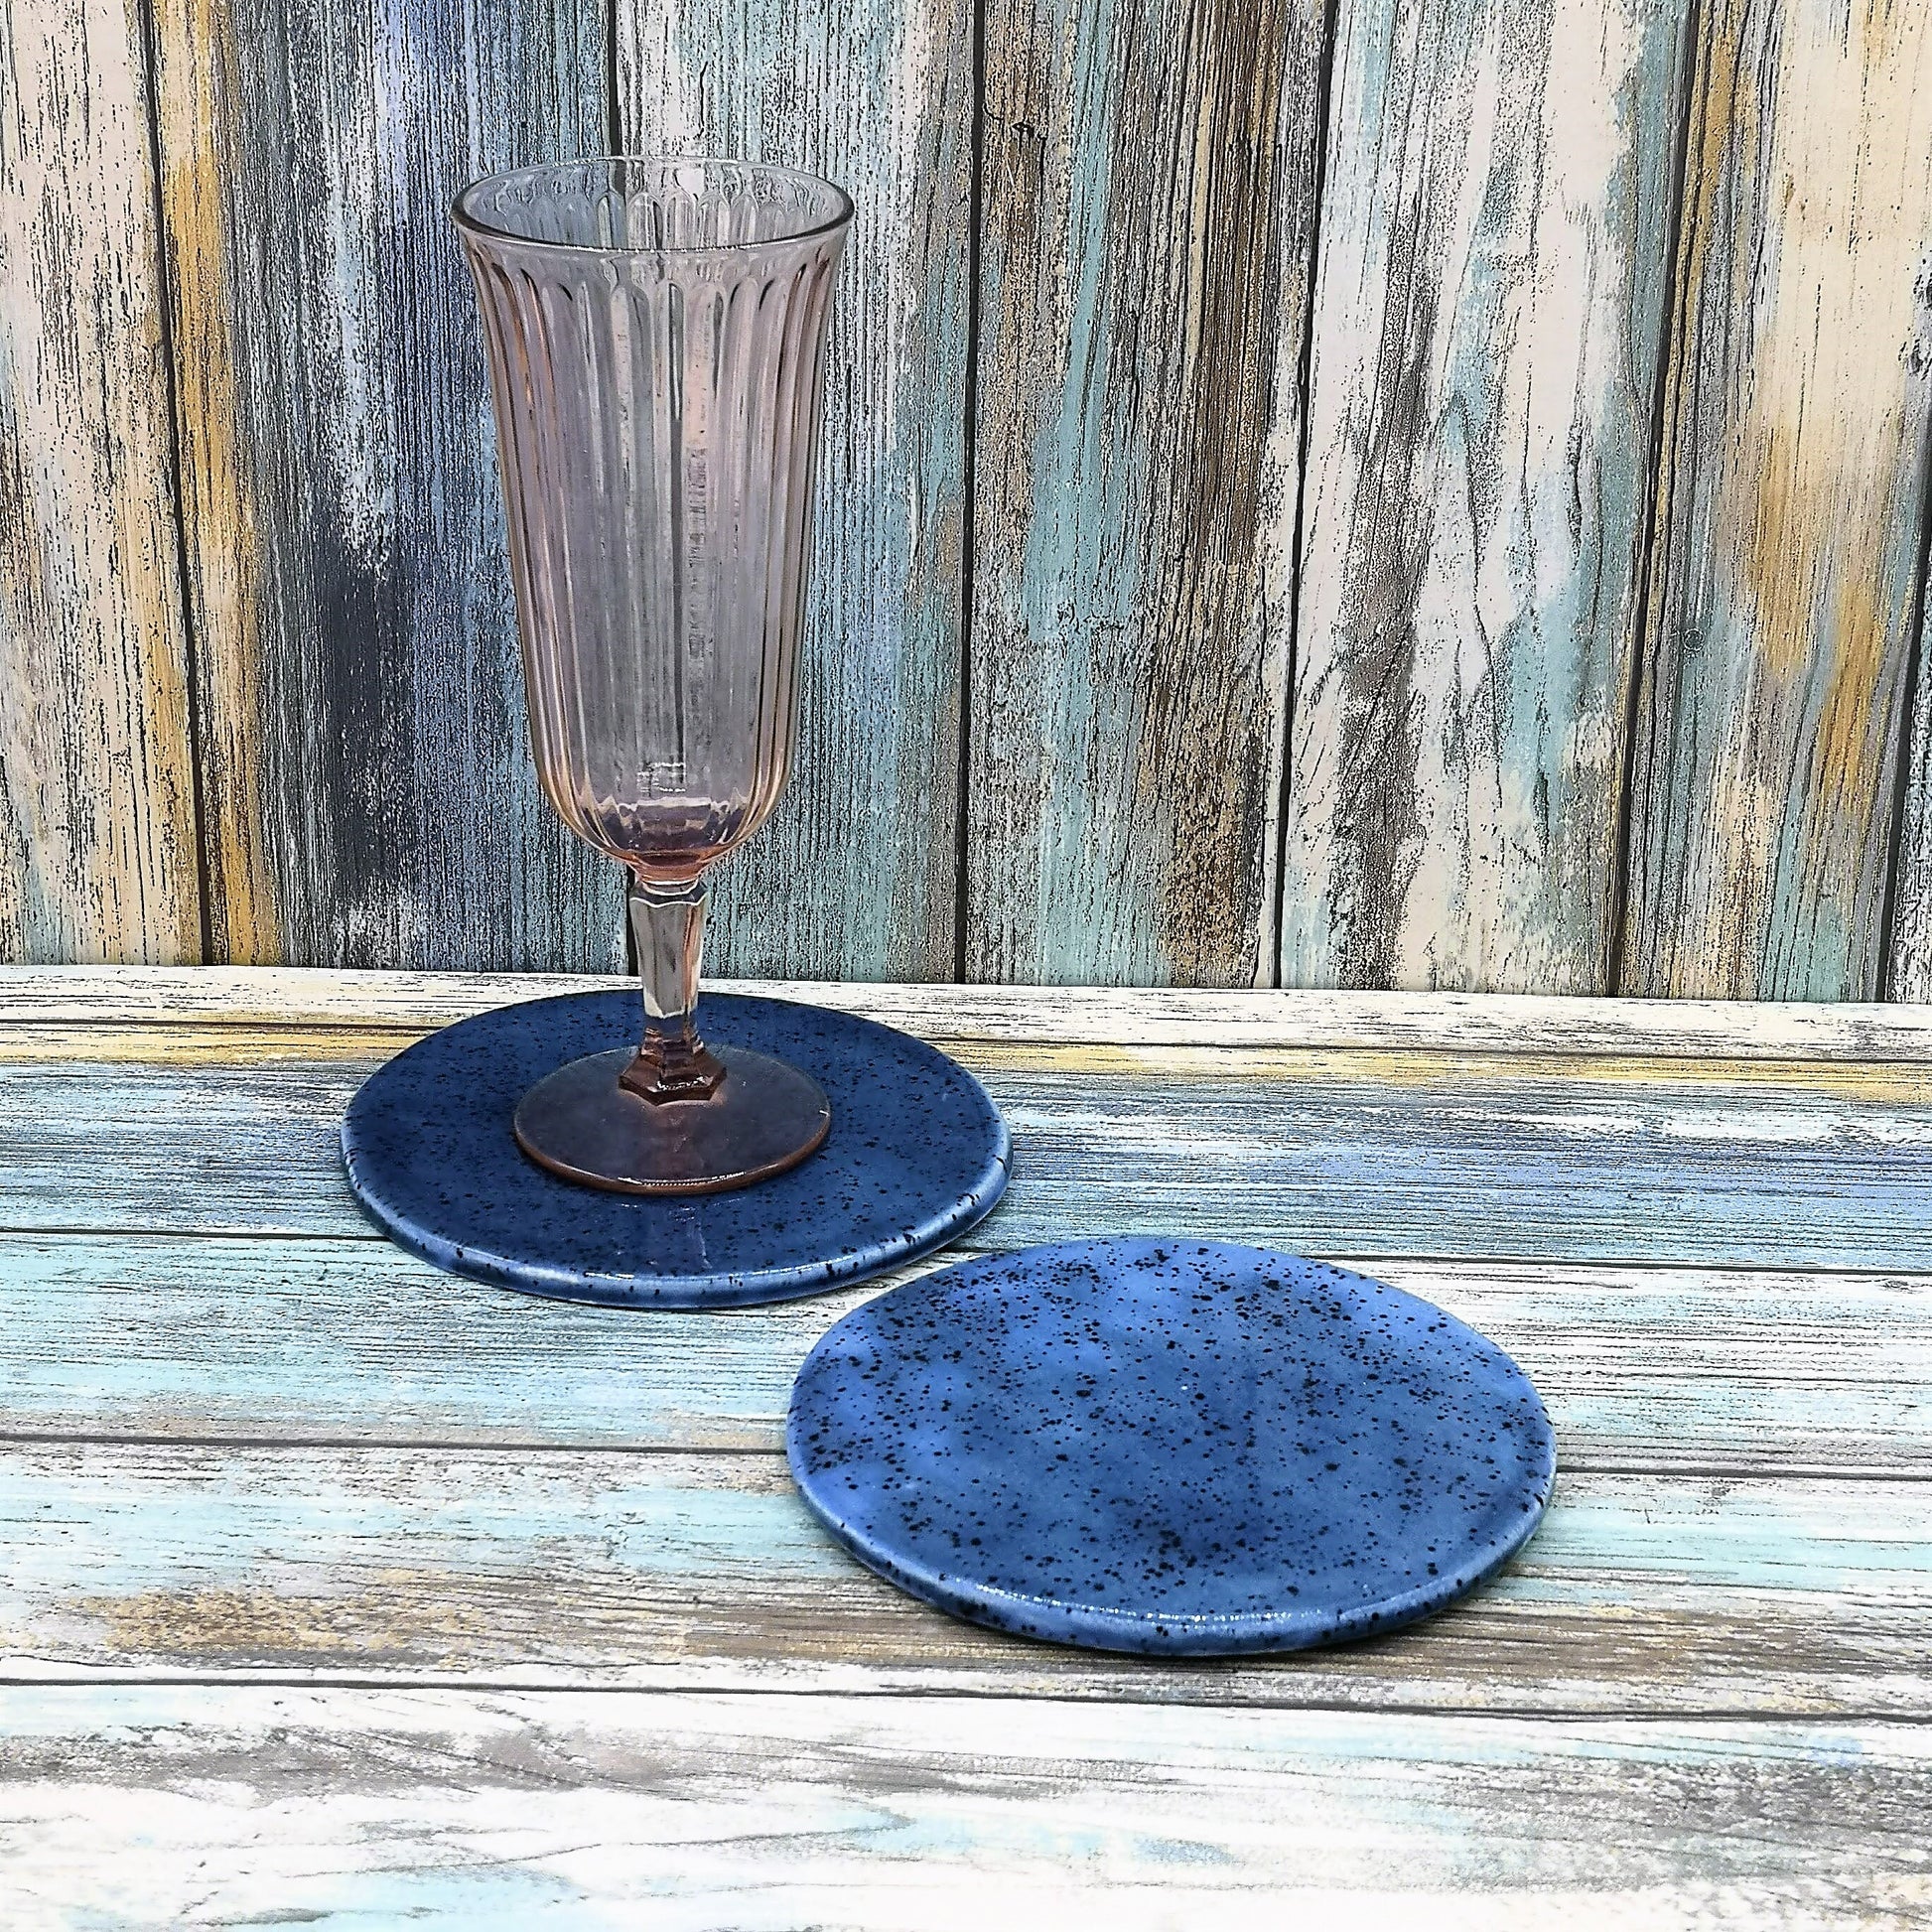 BLUE COASTERS, CERAMIC Coasters For Drinks, Office Desk Accessories For Men, Dad Birthday Gift From Daughter, Housewarming Gift First Home - Ceramica Ana Rafael